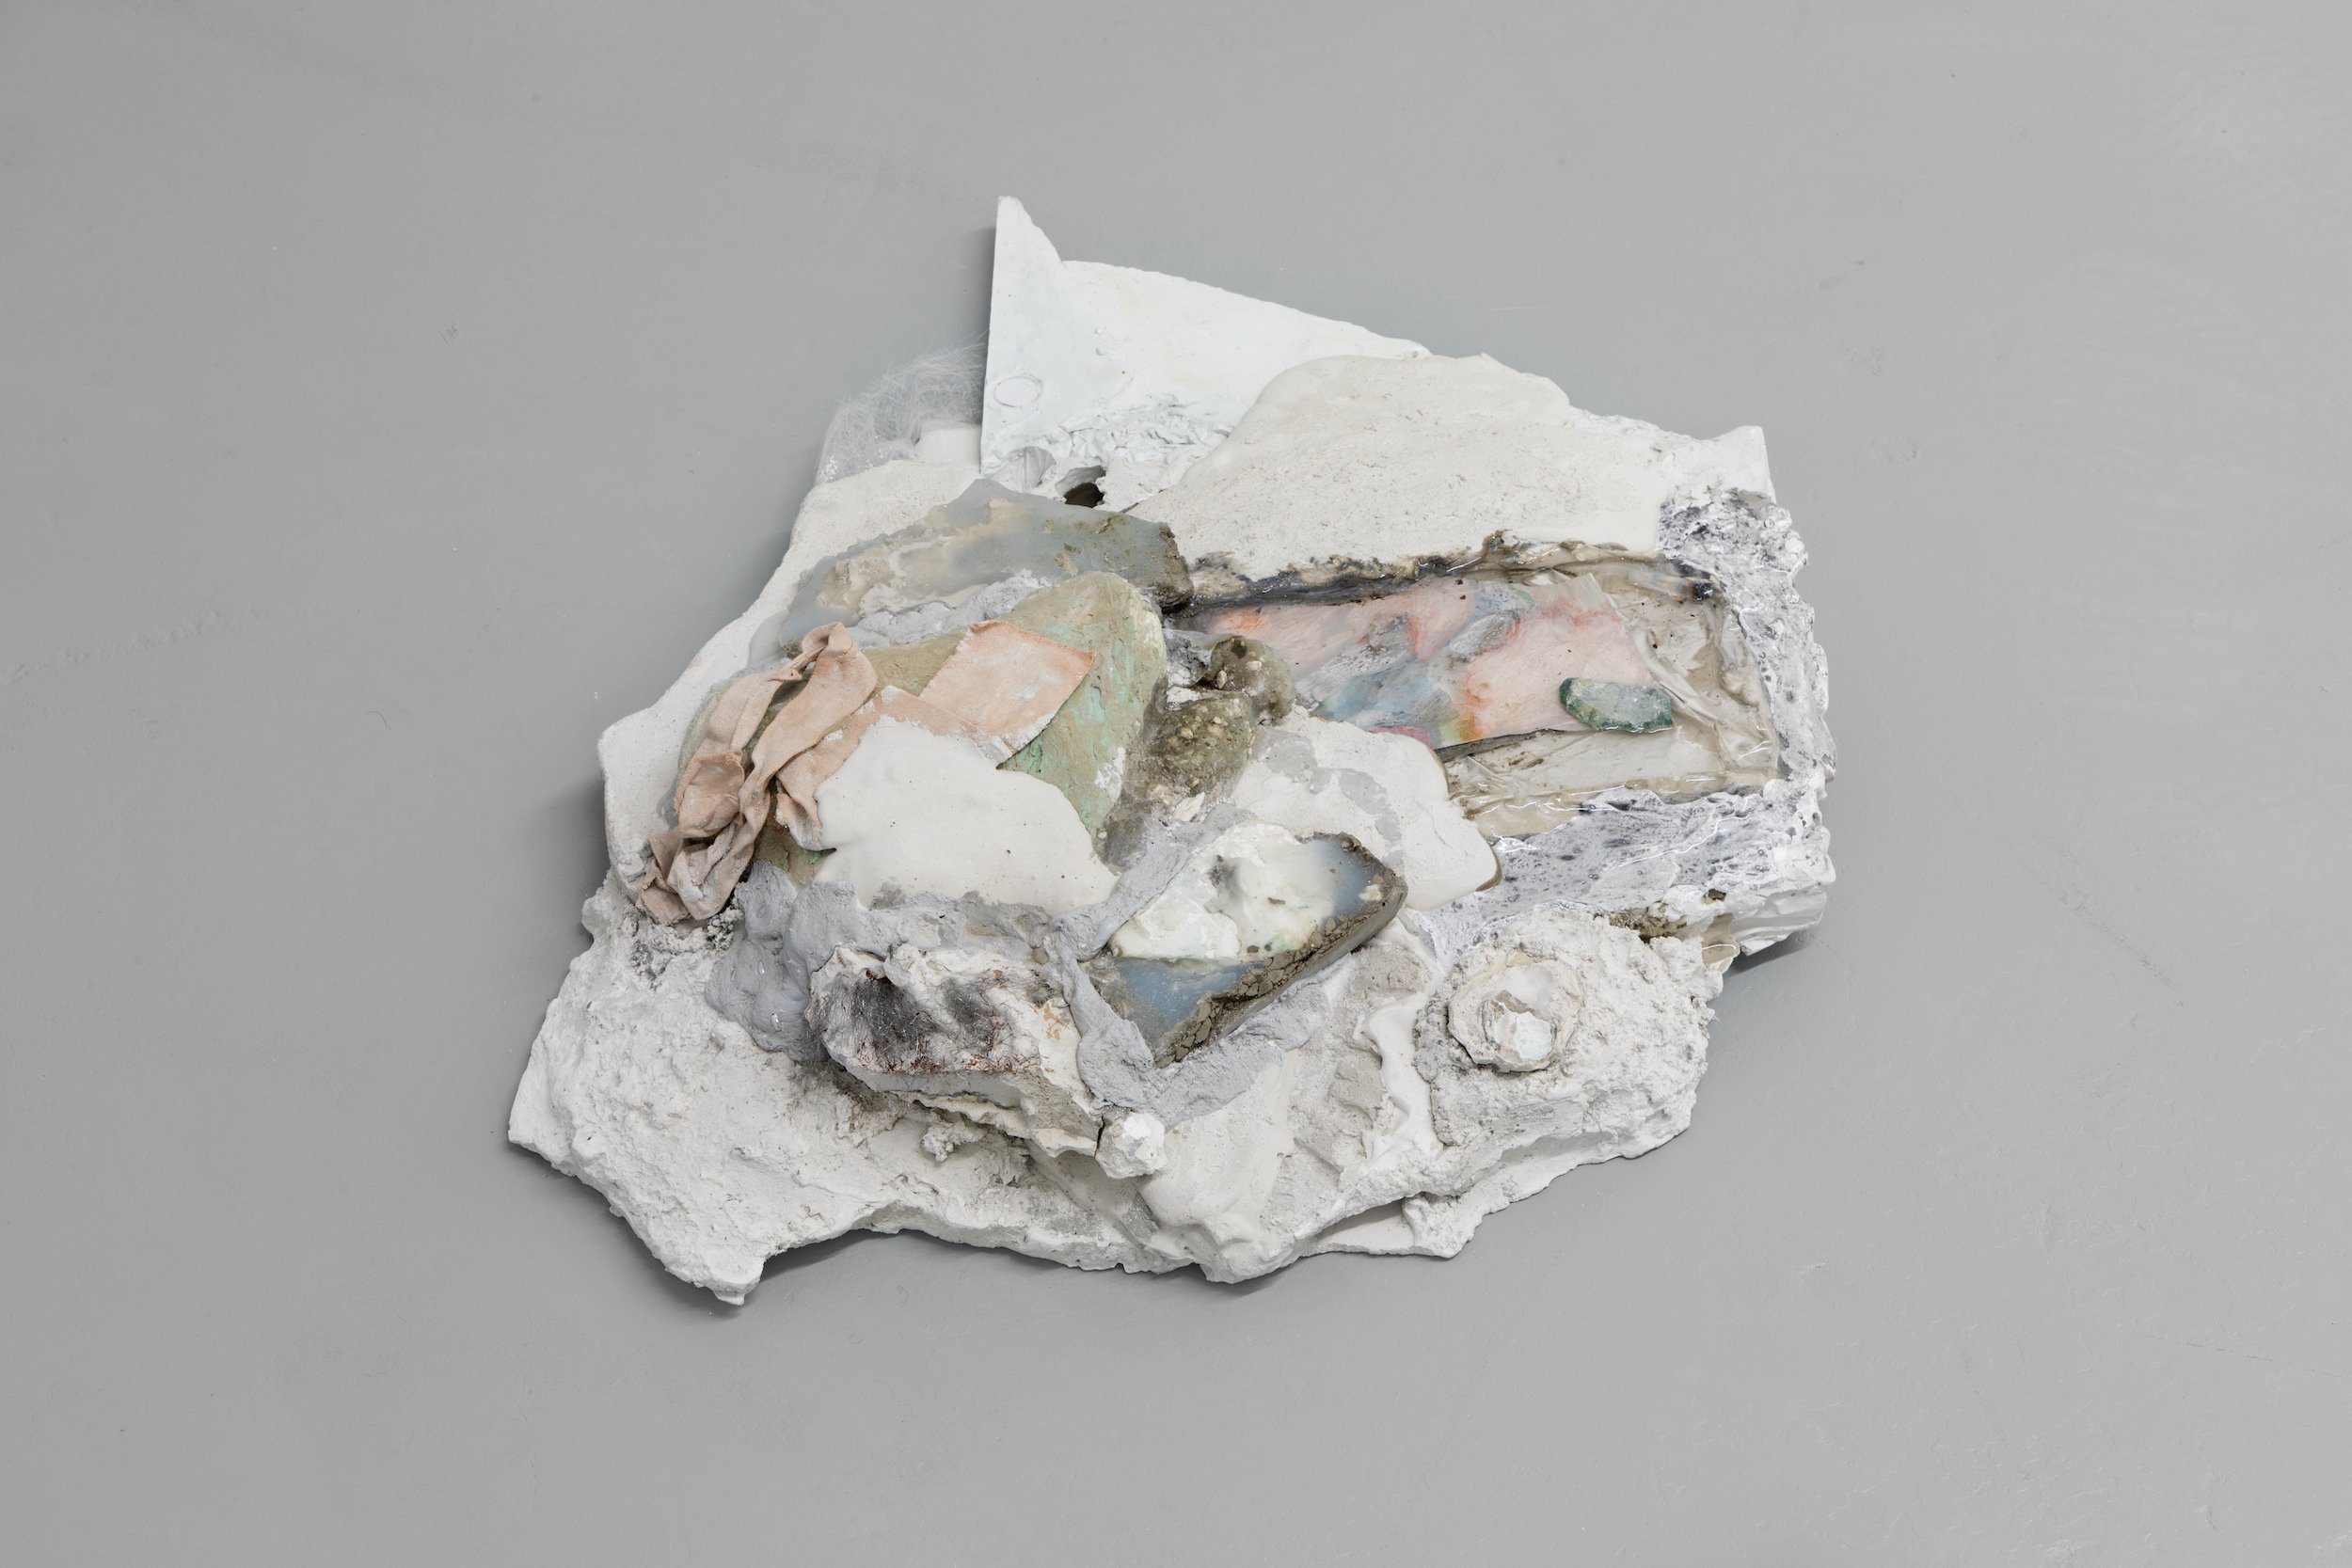  Laur P,  There there, another blink, another green alibi , 2024, Watercolour, acrylic and aluminum leaf on paper, fragments of plaster casts, dry pigments, epoxy resin, acrylic paint, silicone, trans tape, concrete sealant, 54.6 x 40.6 x 12.7 cm  (2